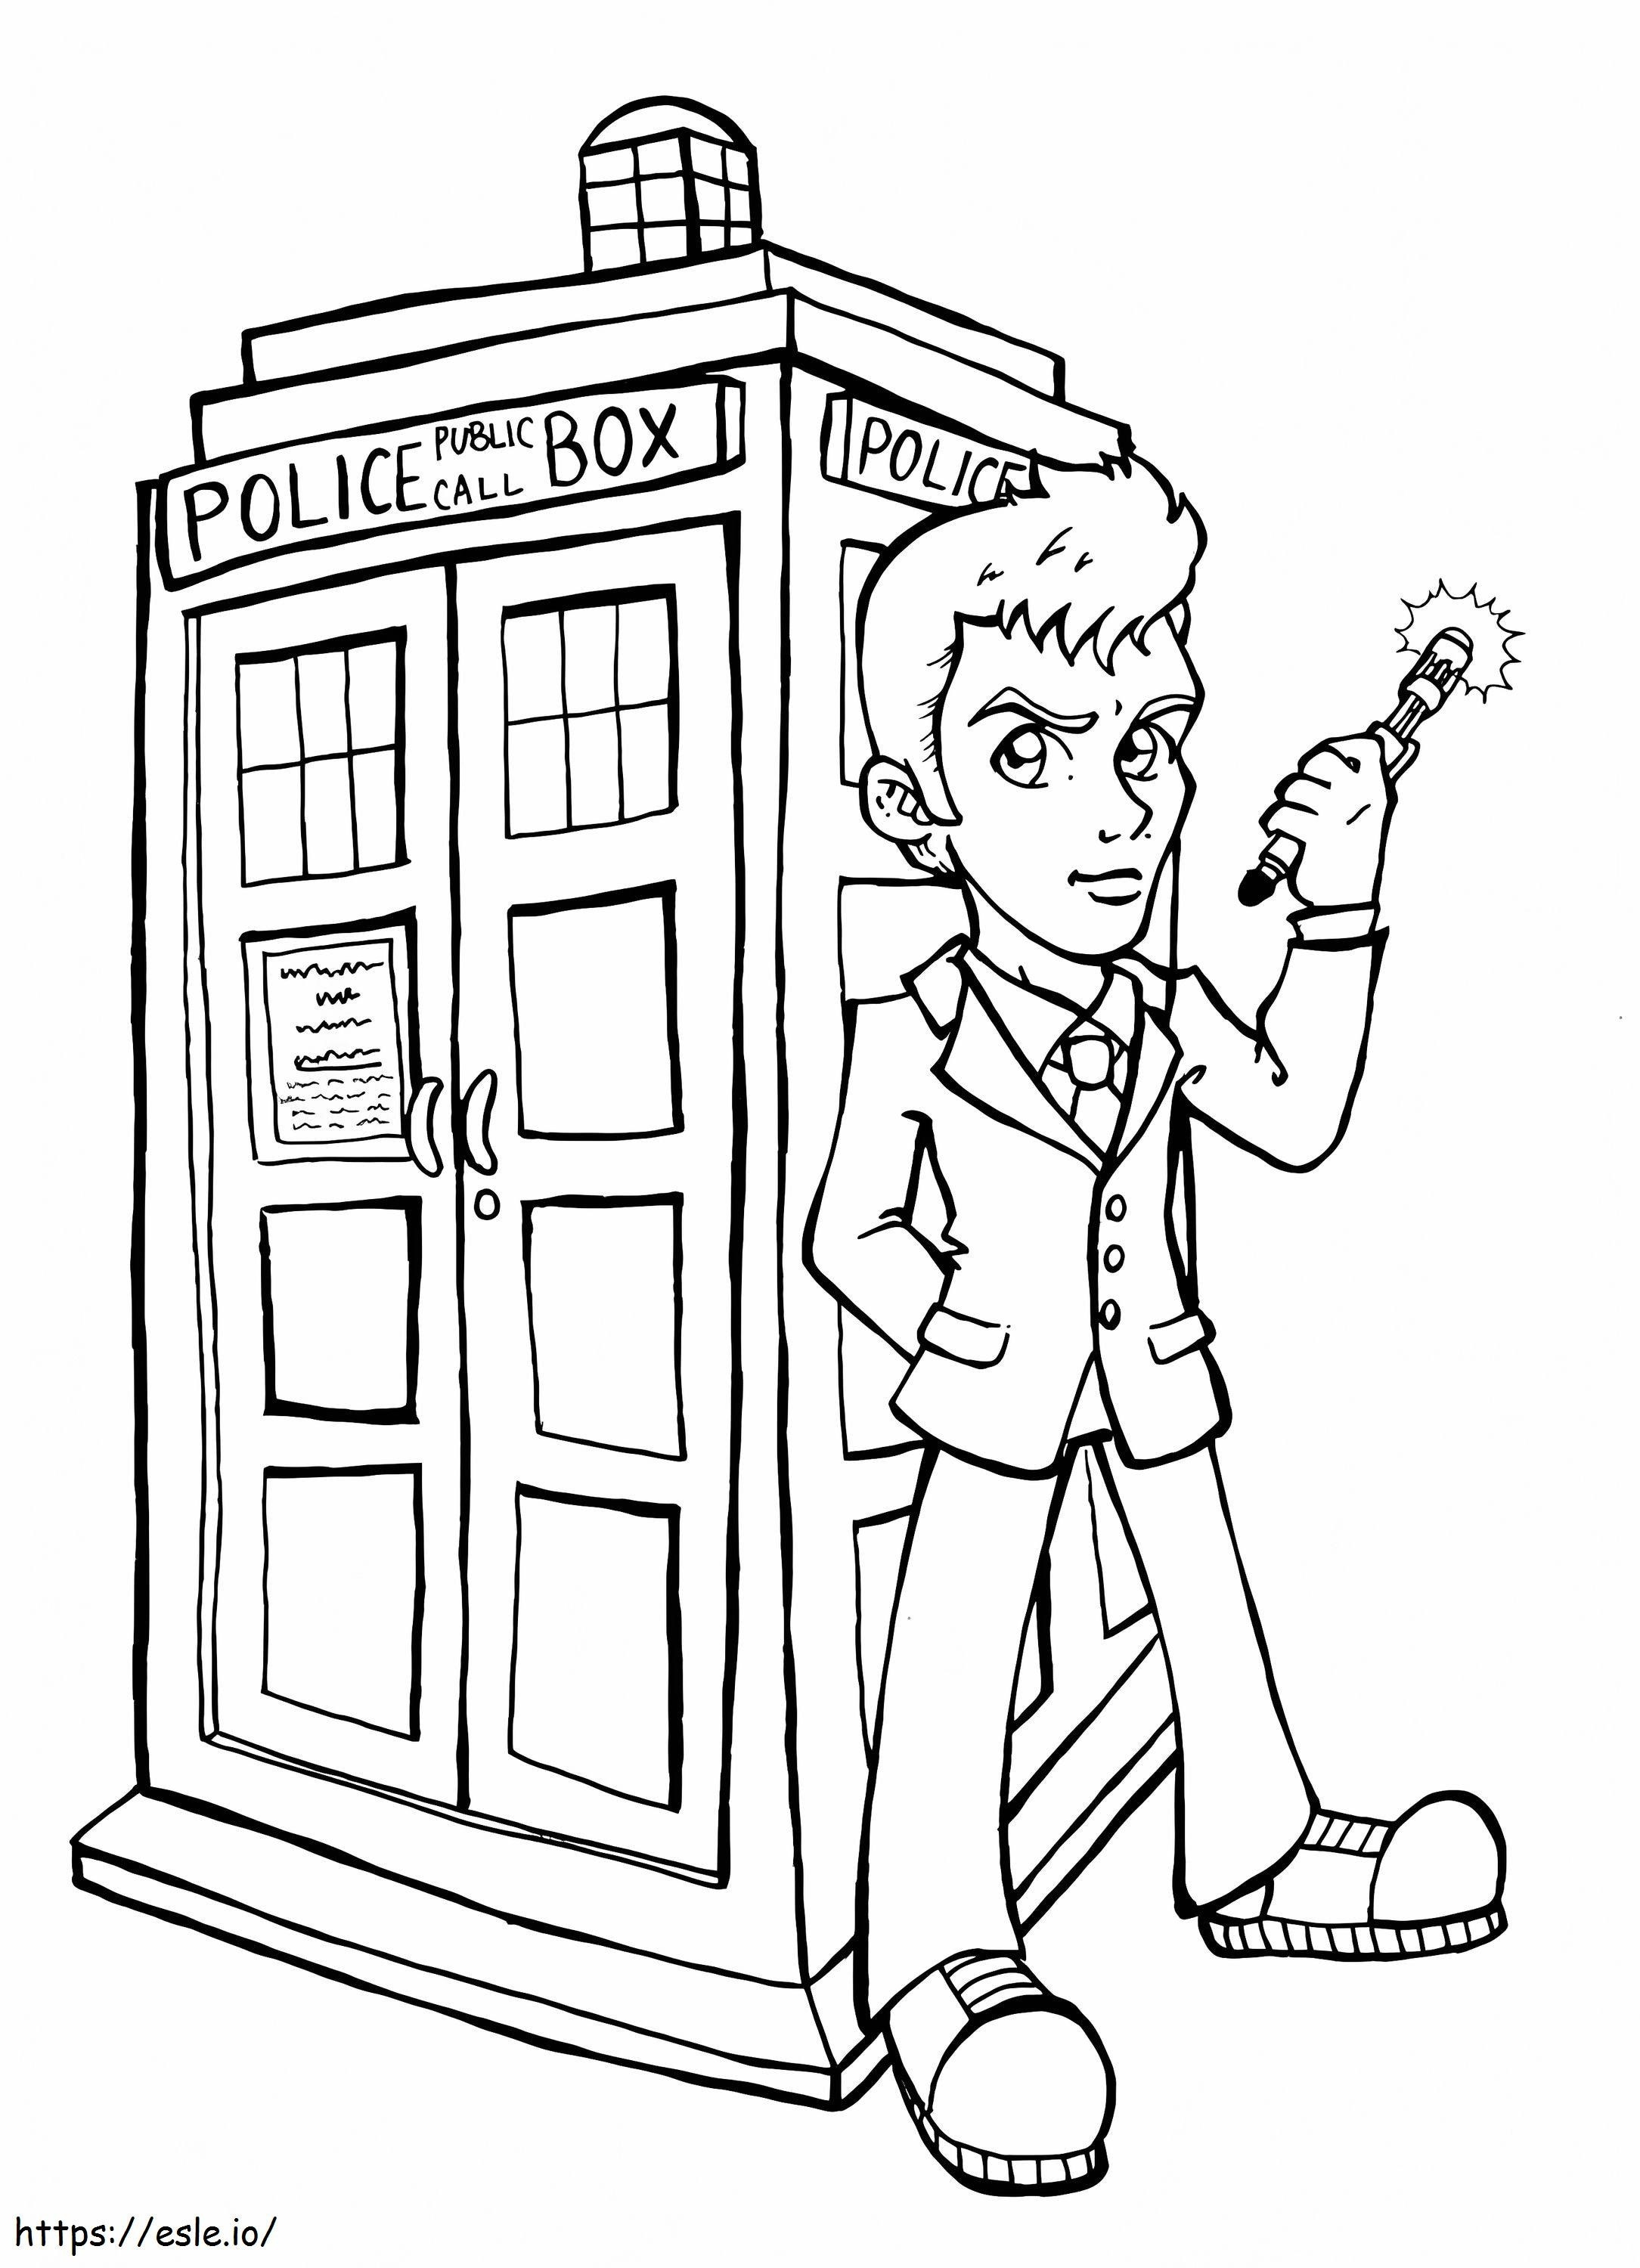 Cartoon Doctor Who coloring page